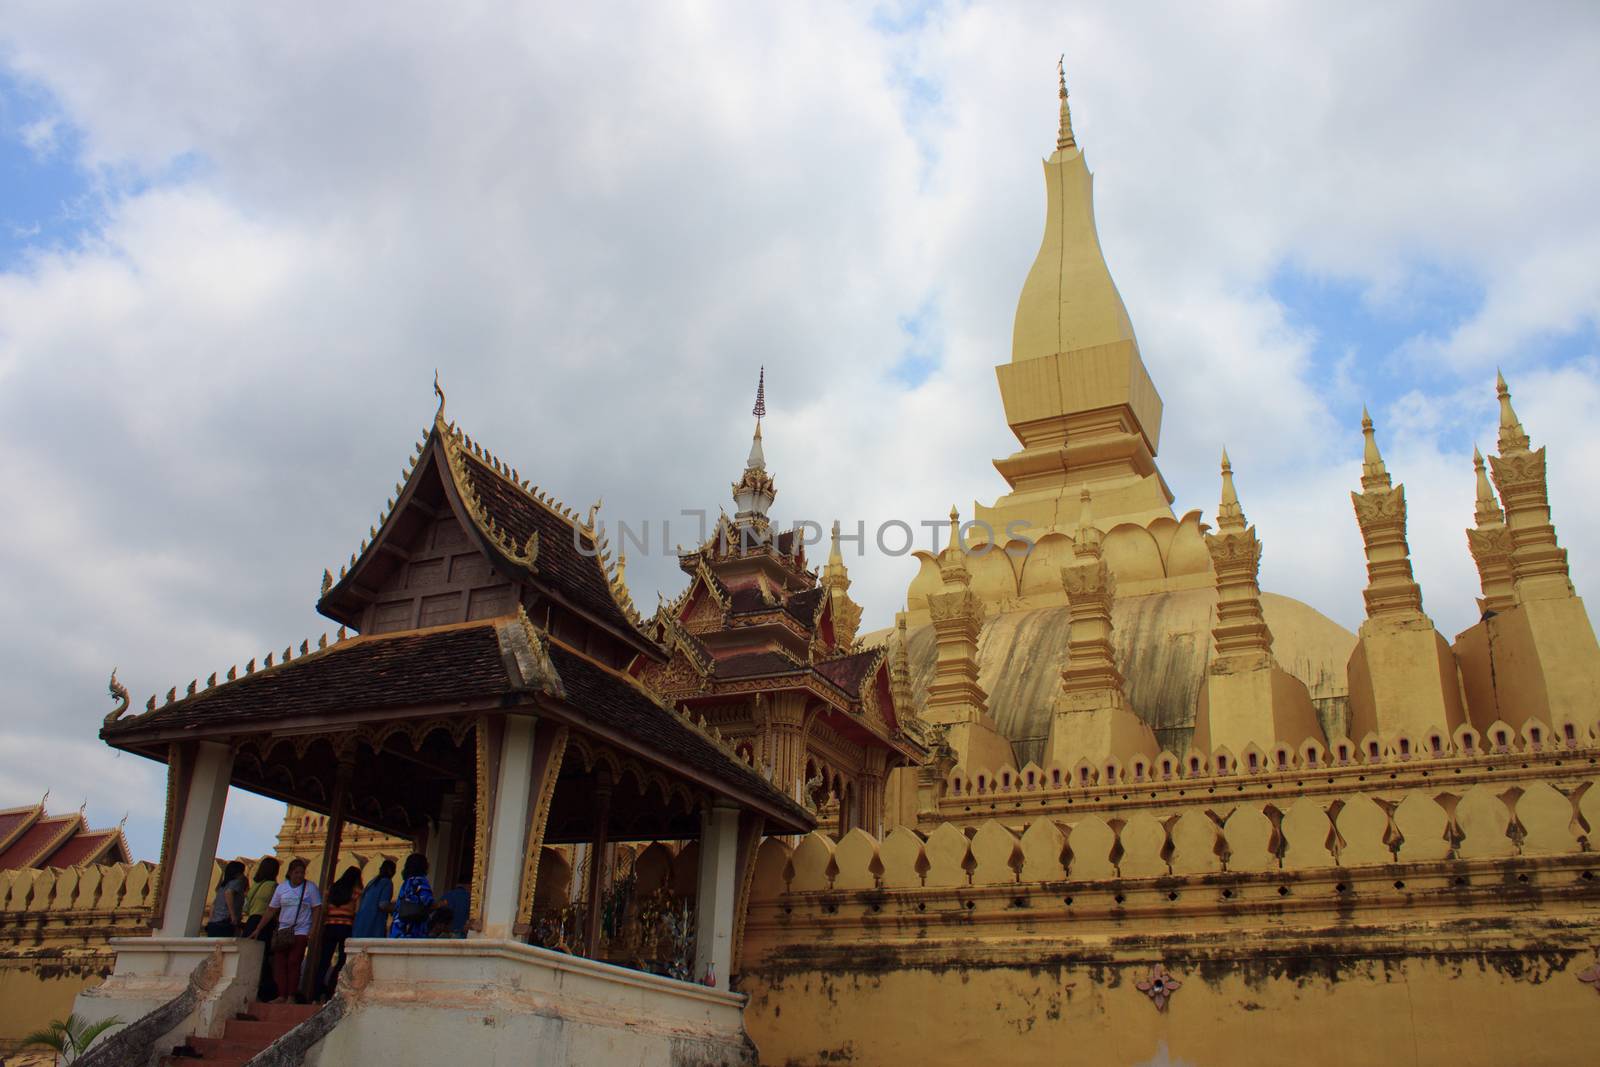 Pha That Luang is located in Laos. by primzrider